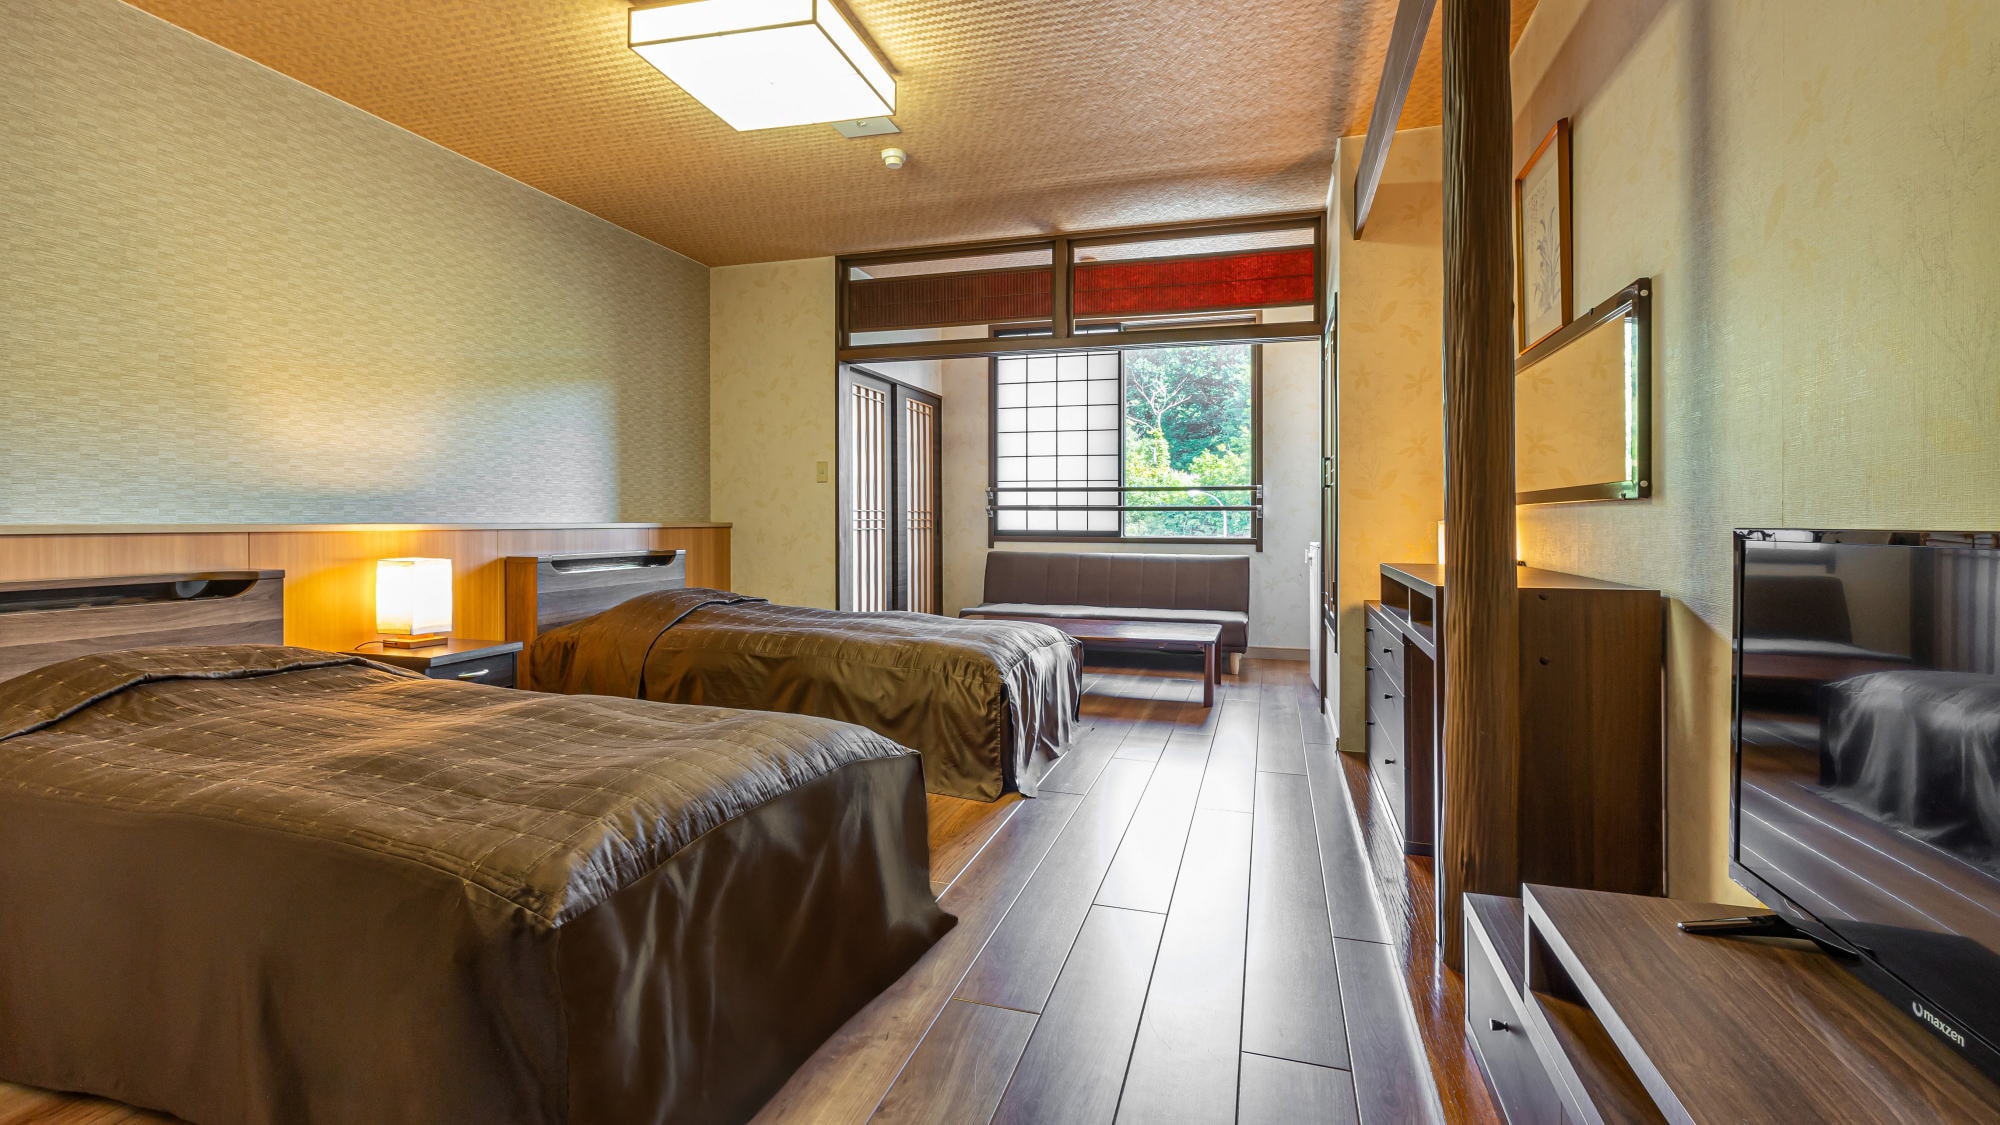 [East Building Twin] The 10 tatami Japanese-style room in the east building of our hotel has been renovated into a Western-style twin room. Western-style twin room with flooring